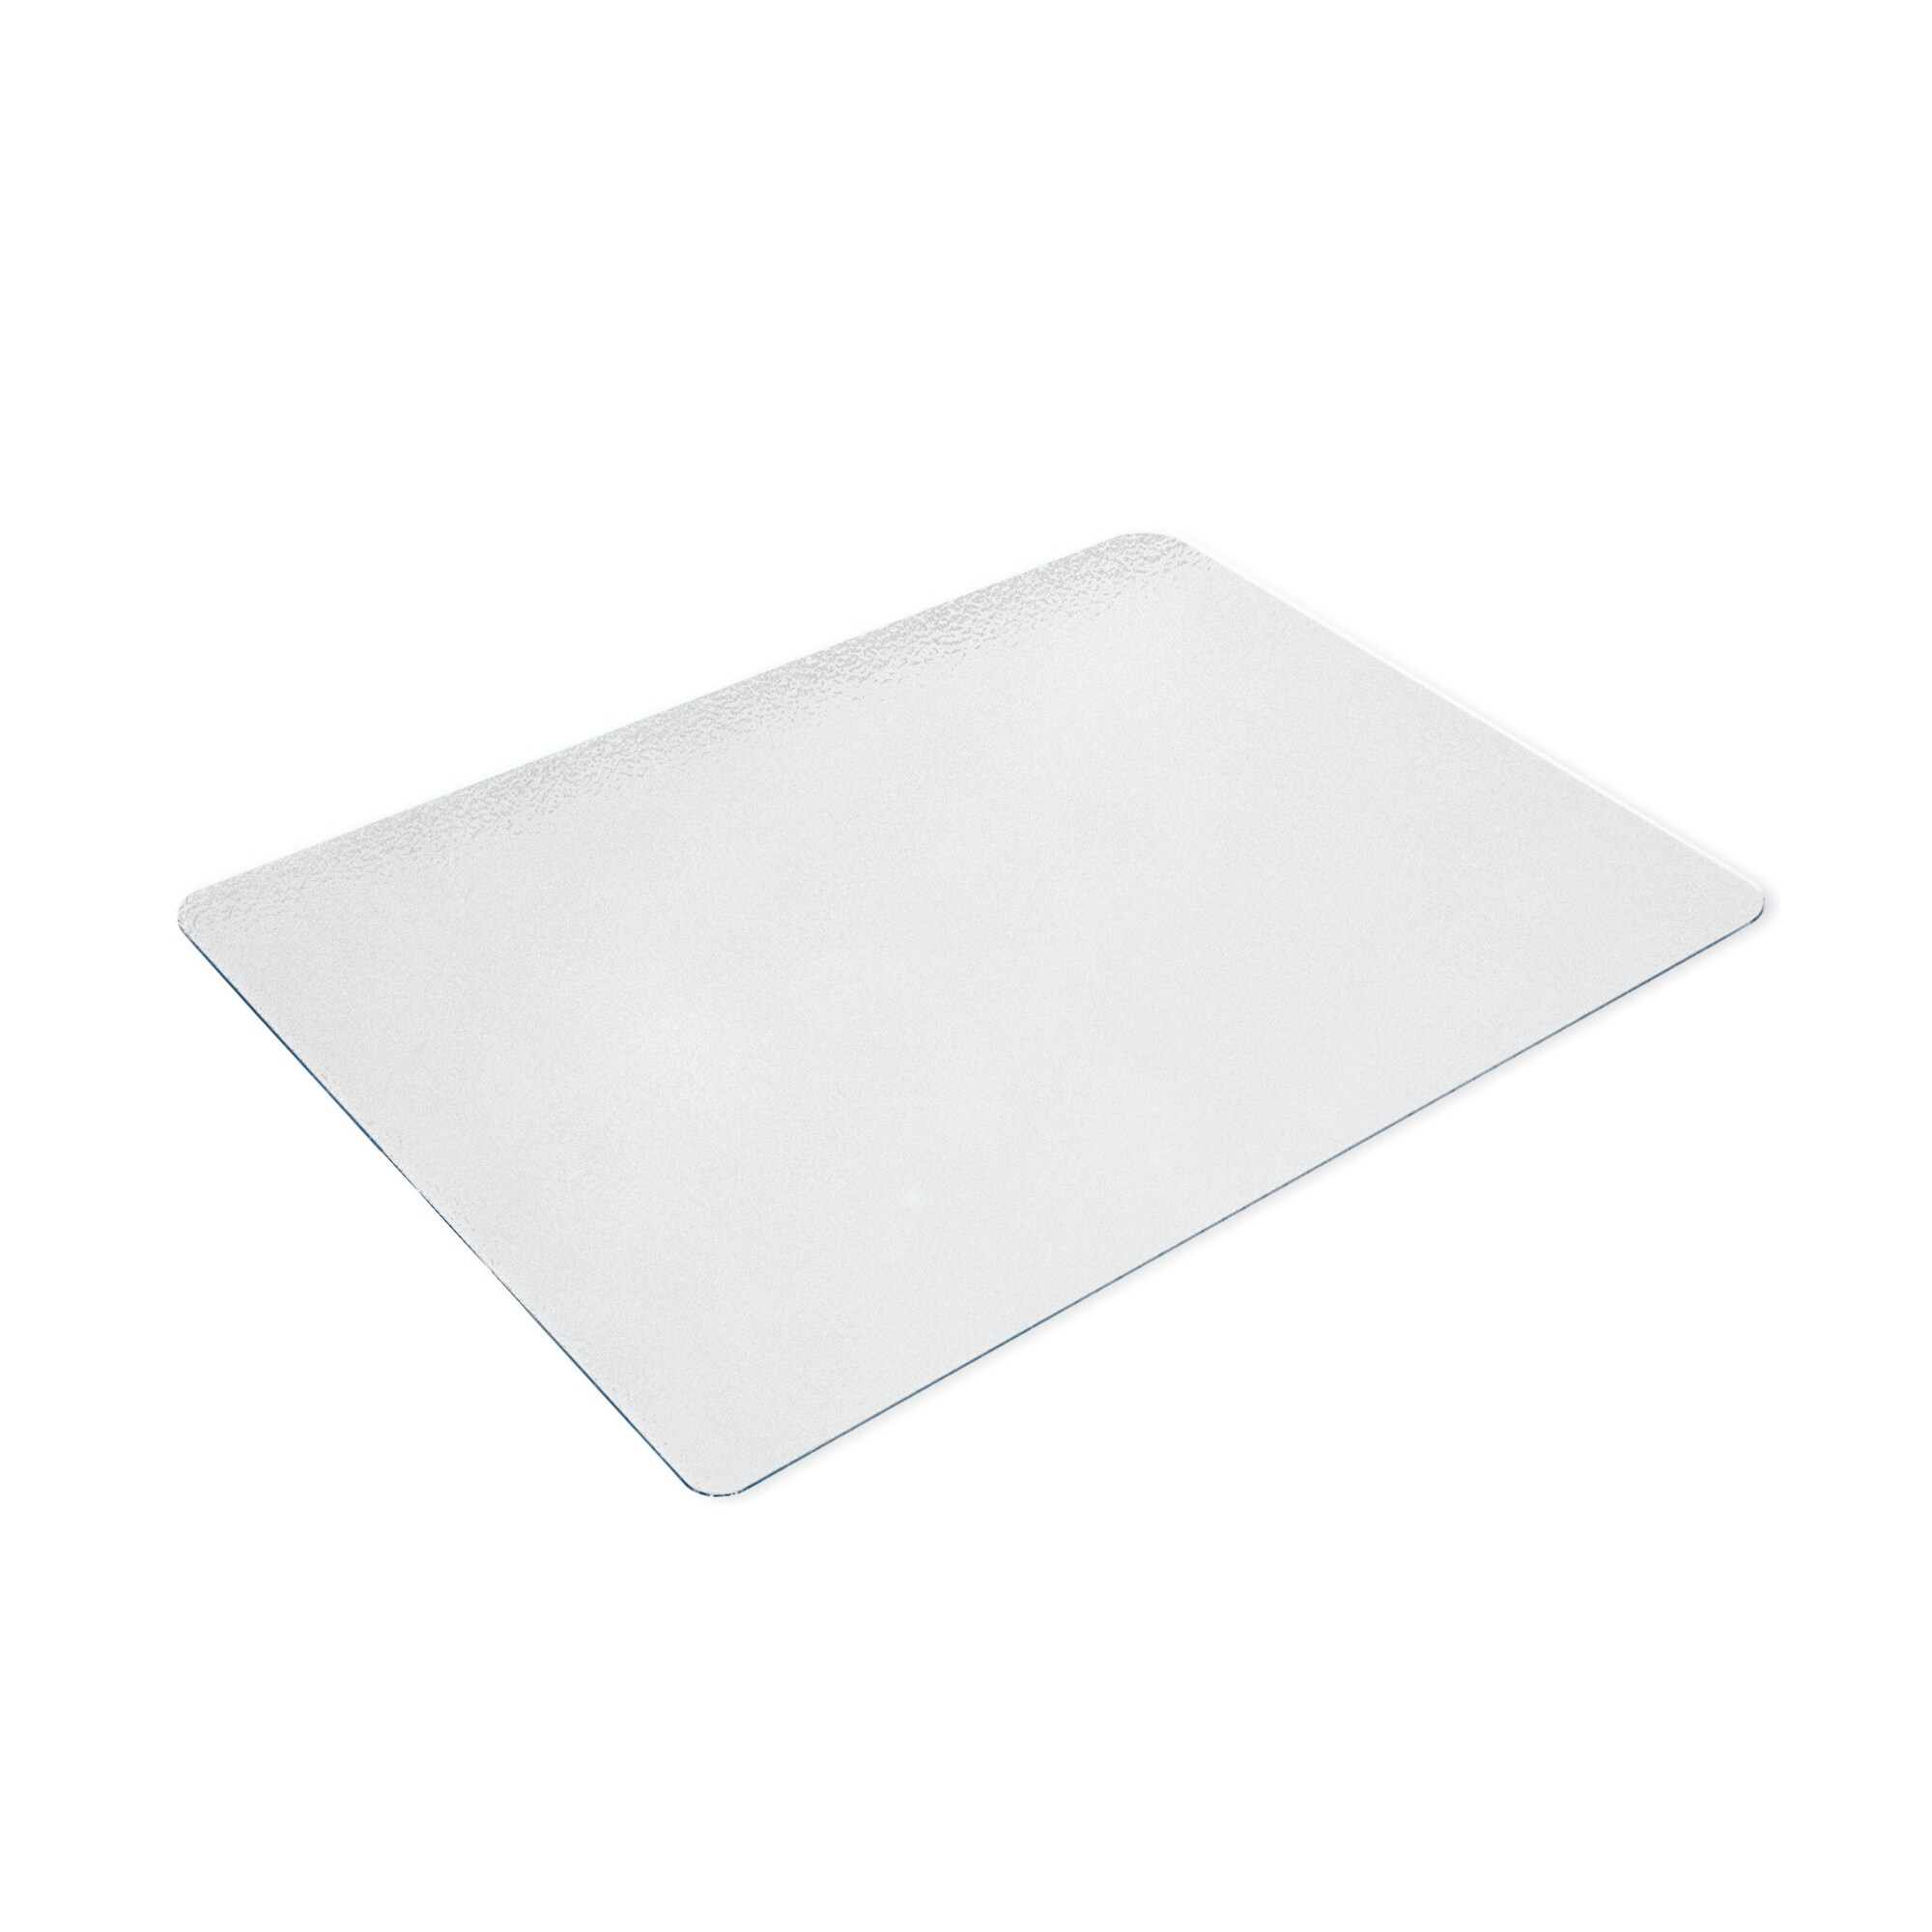 Square Plastic Chopping Boards with Non-Toxic Odorless Material